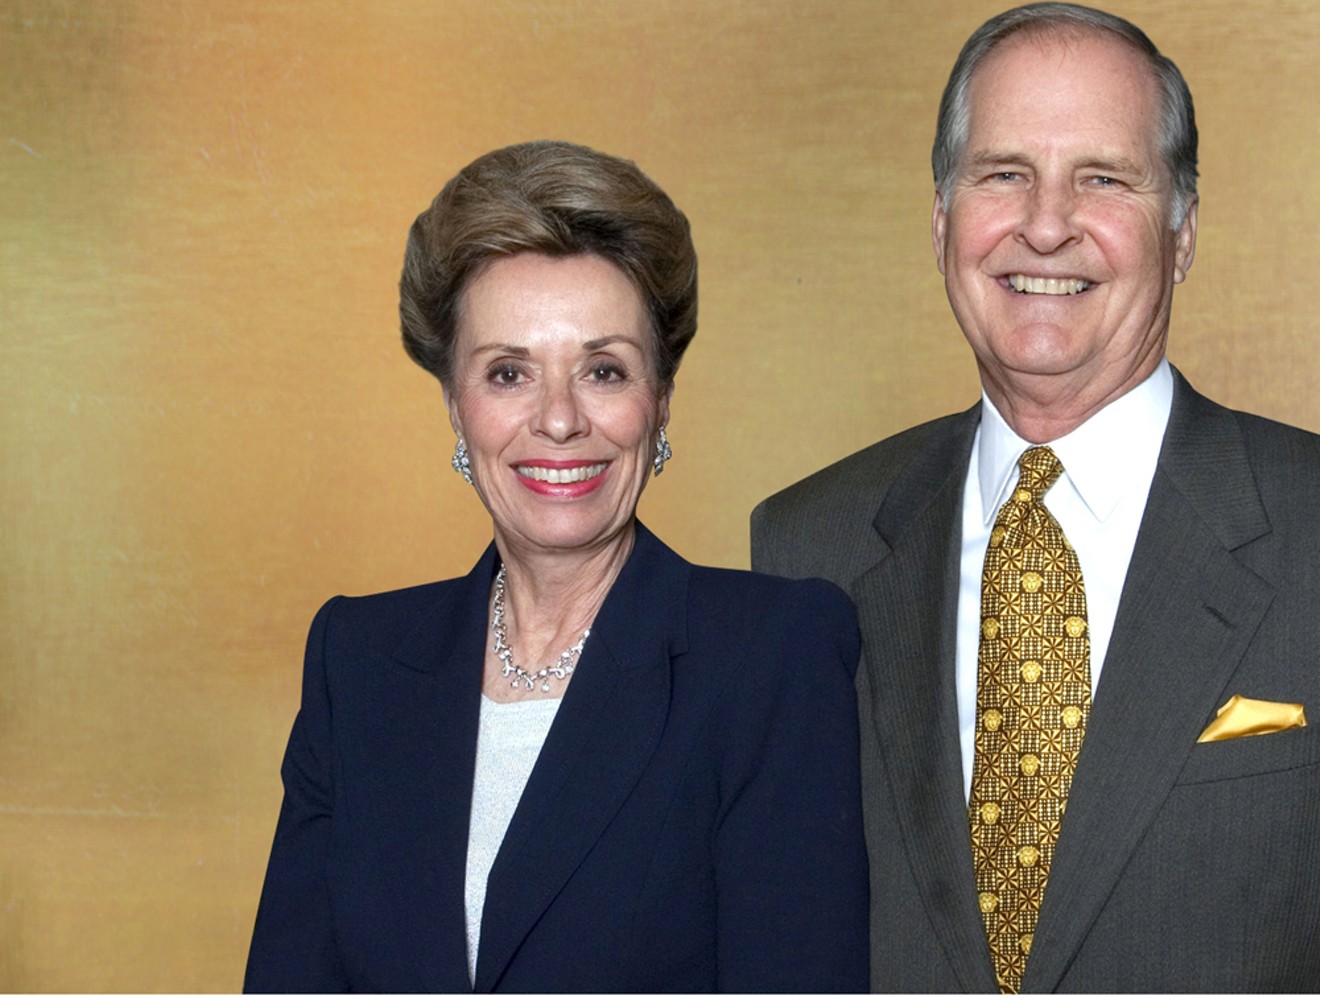 Jeanne and Gary Herberger, who have a long history of arts philanthropy.